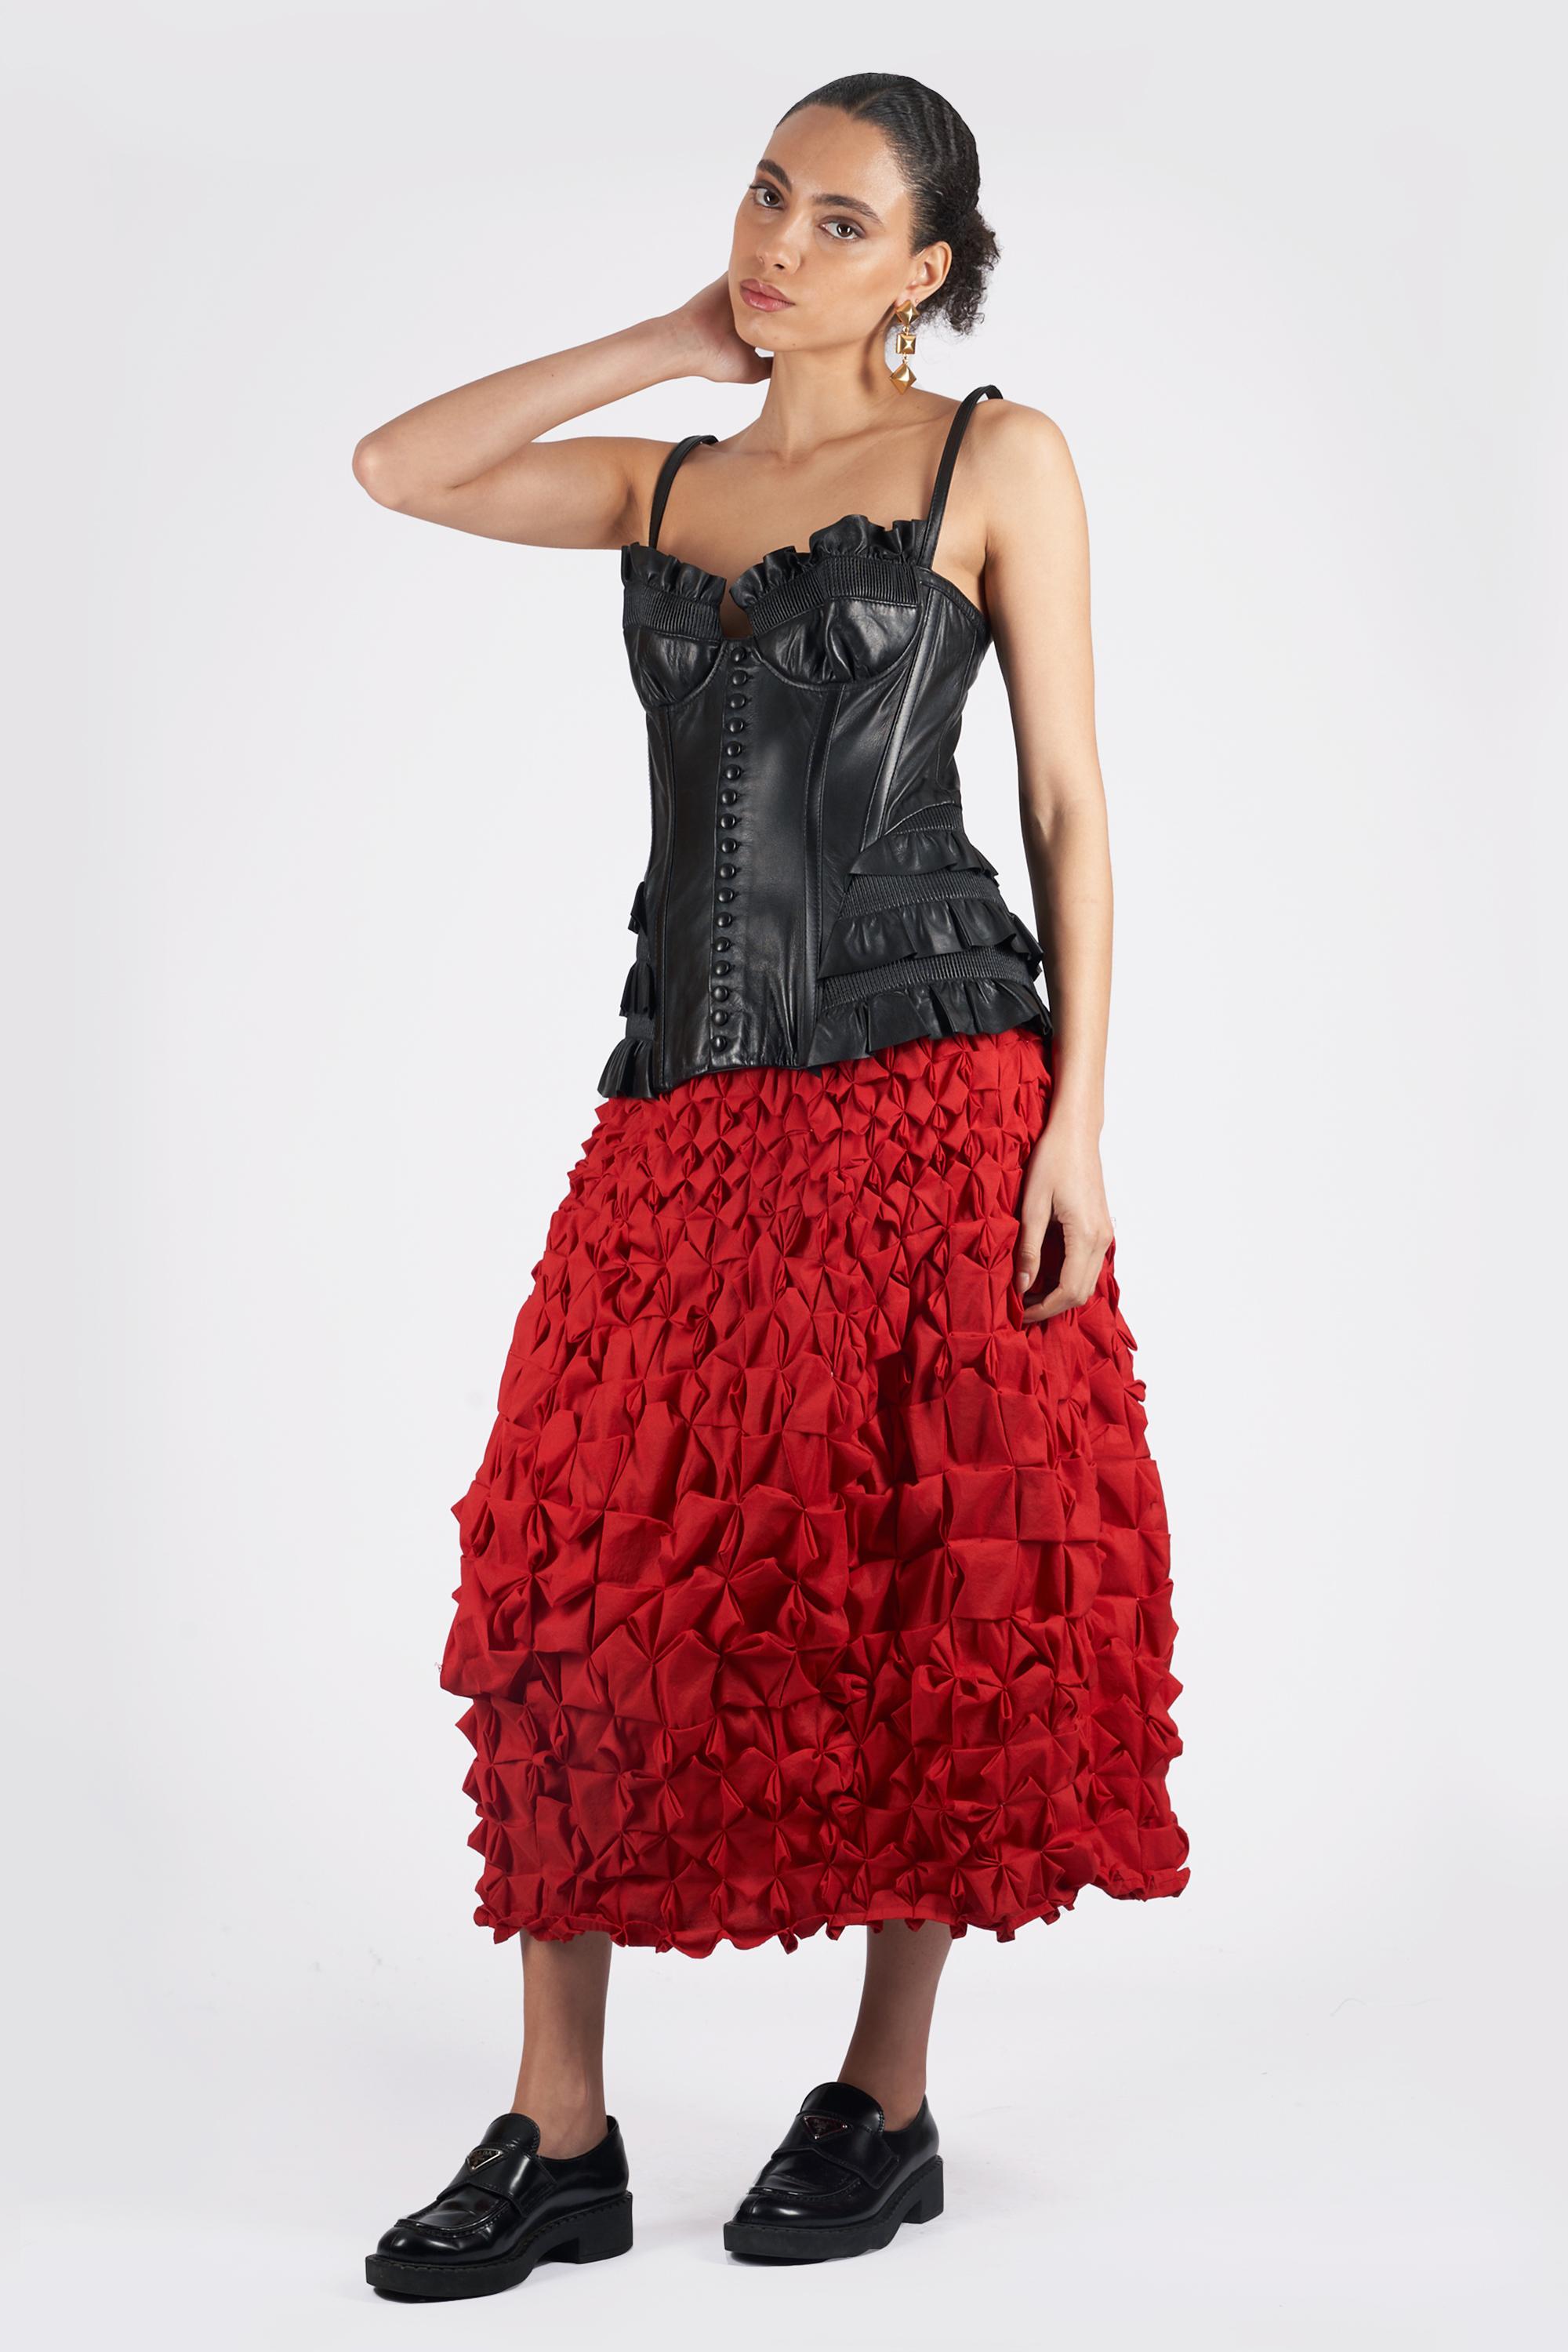 Women's Leather Corset with Frills For Sale